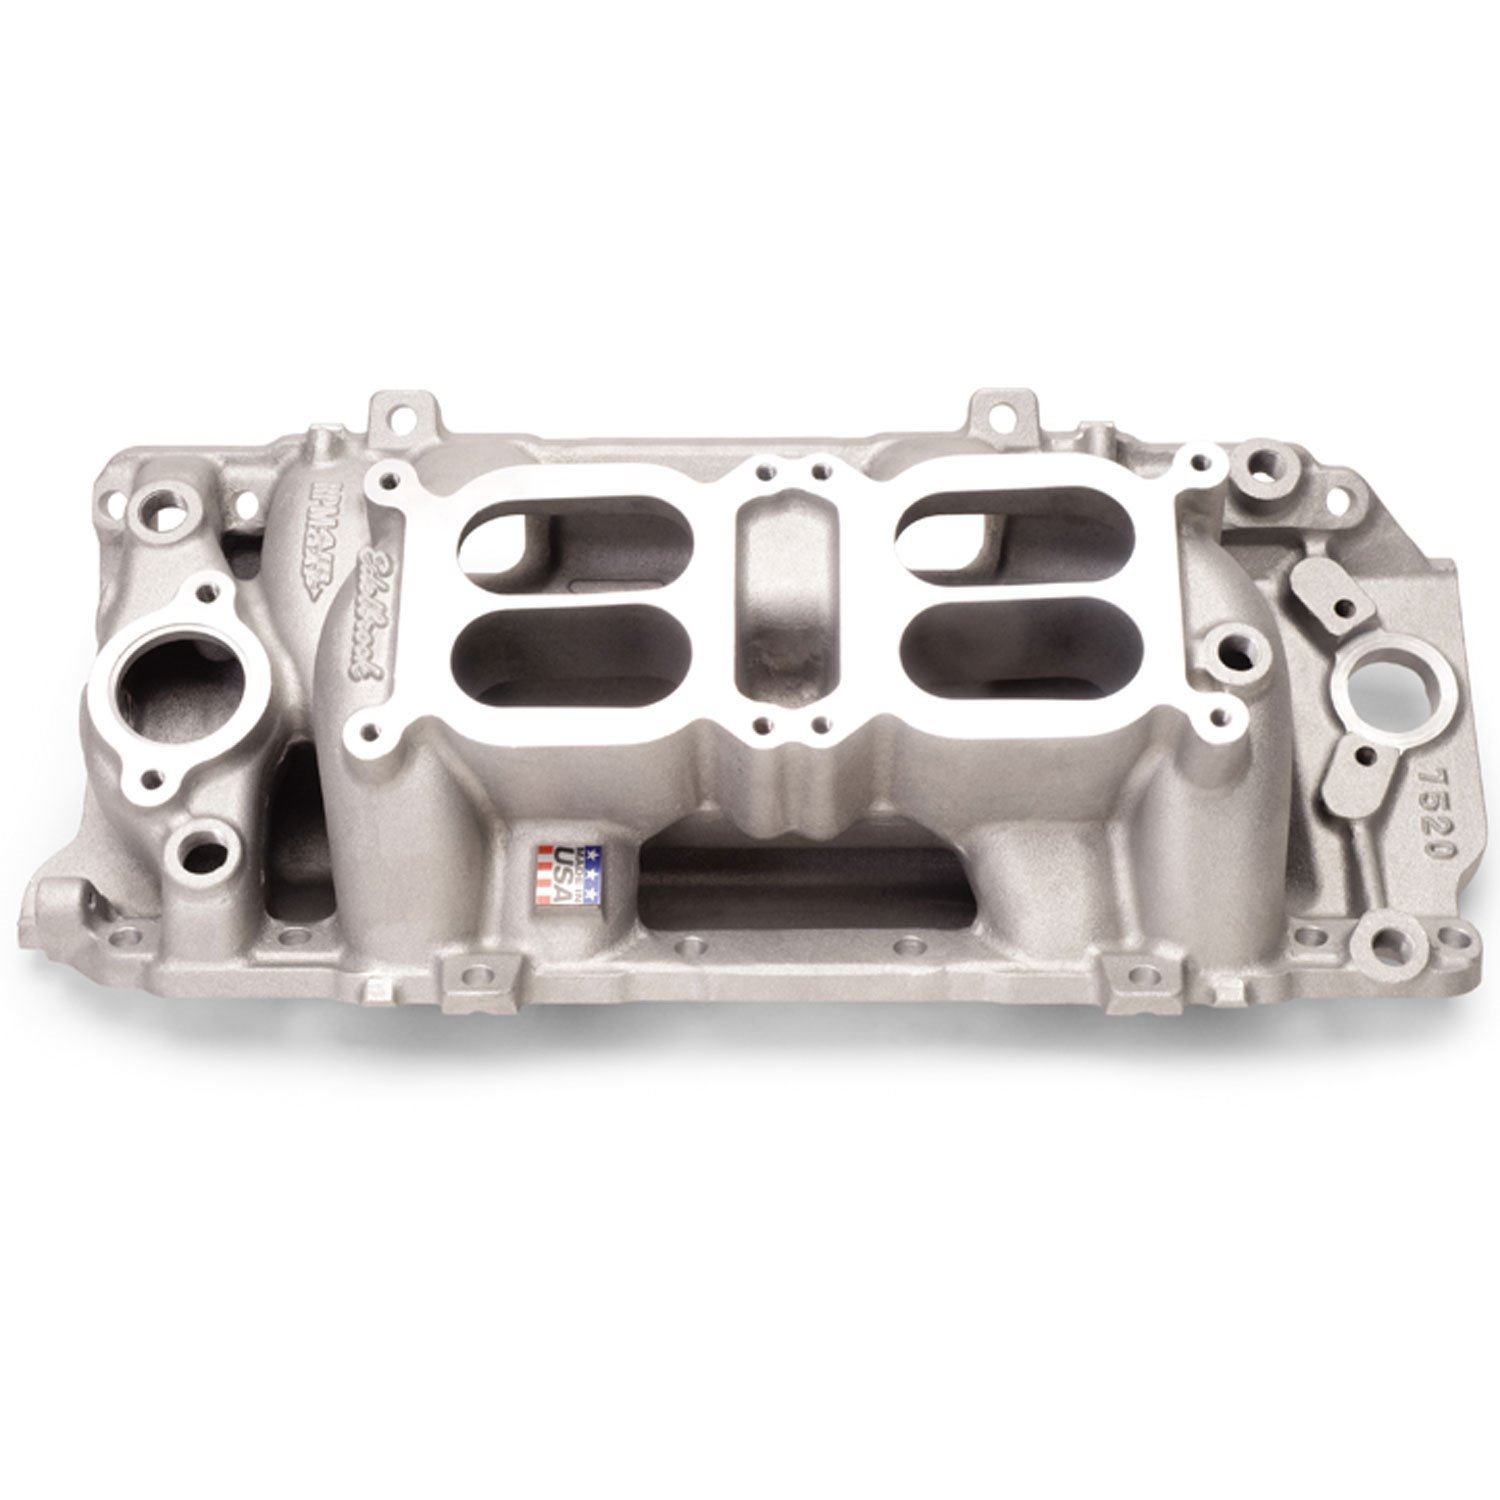 RPM Air-Gap Dual-Quad Manifold 1975 and Earlier BB-Chevy with Oval Ports